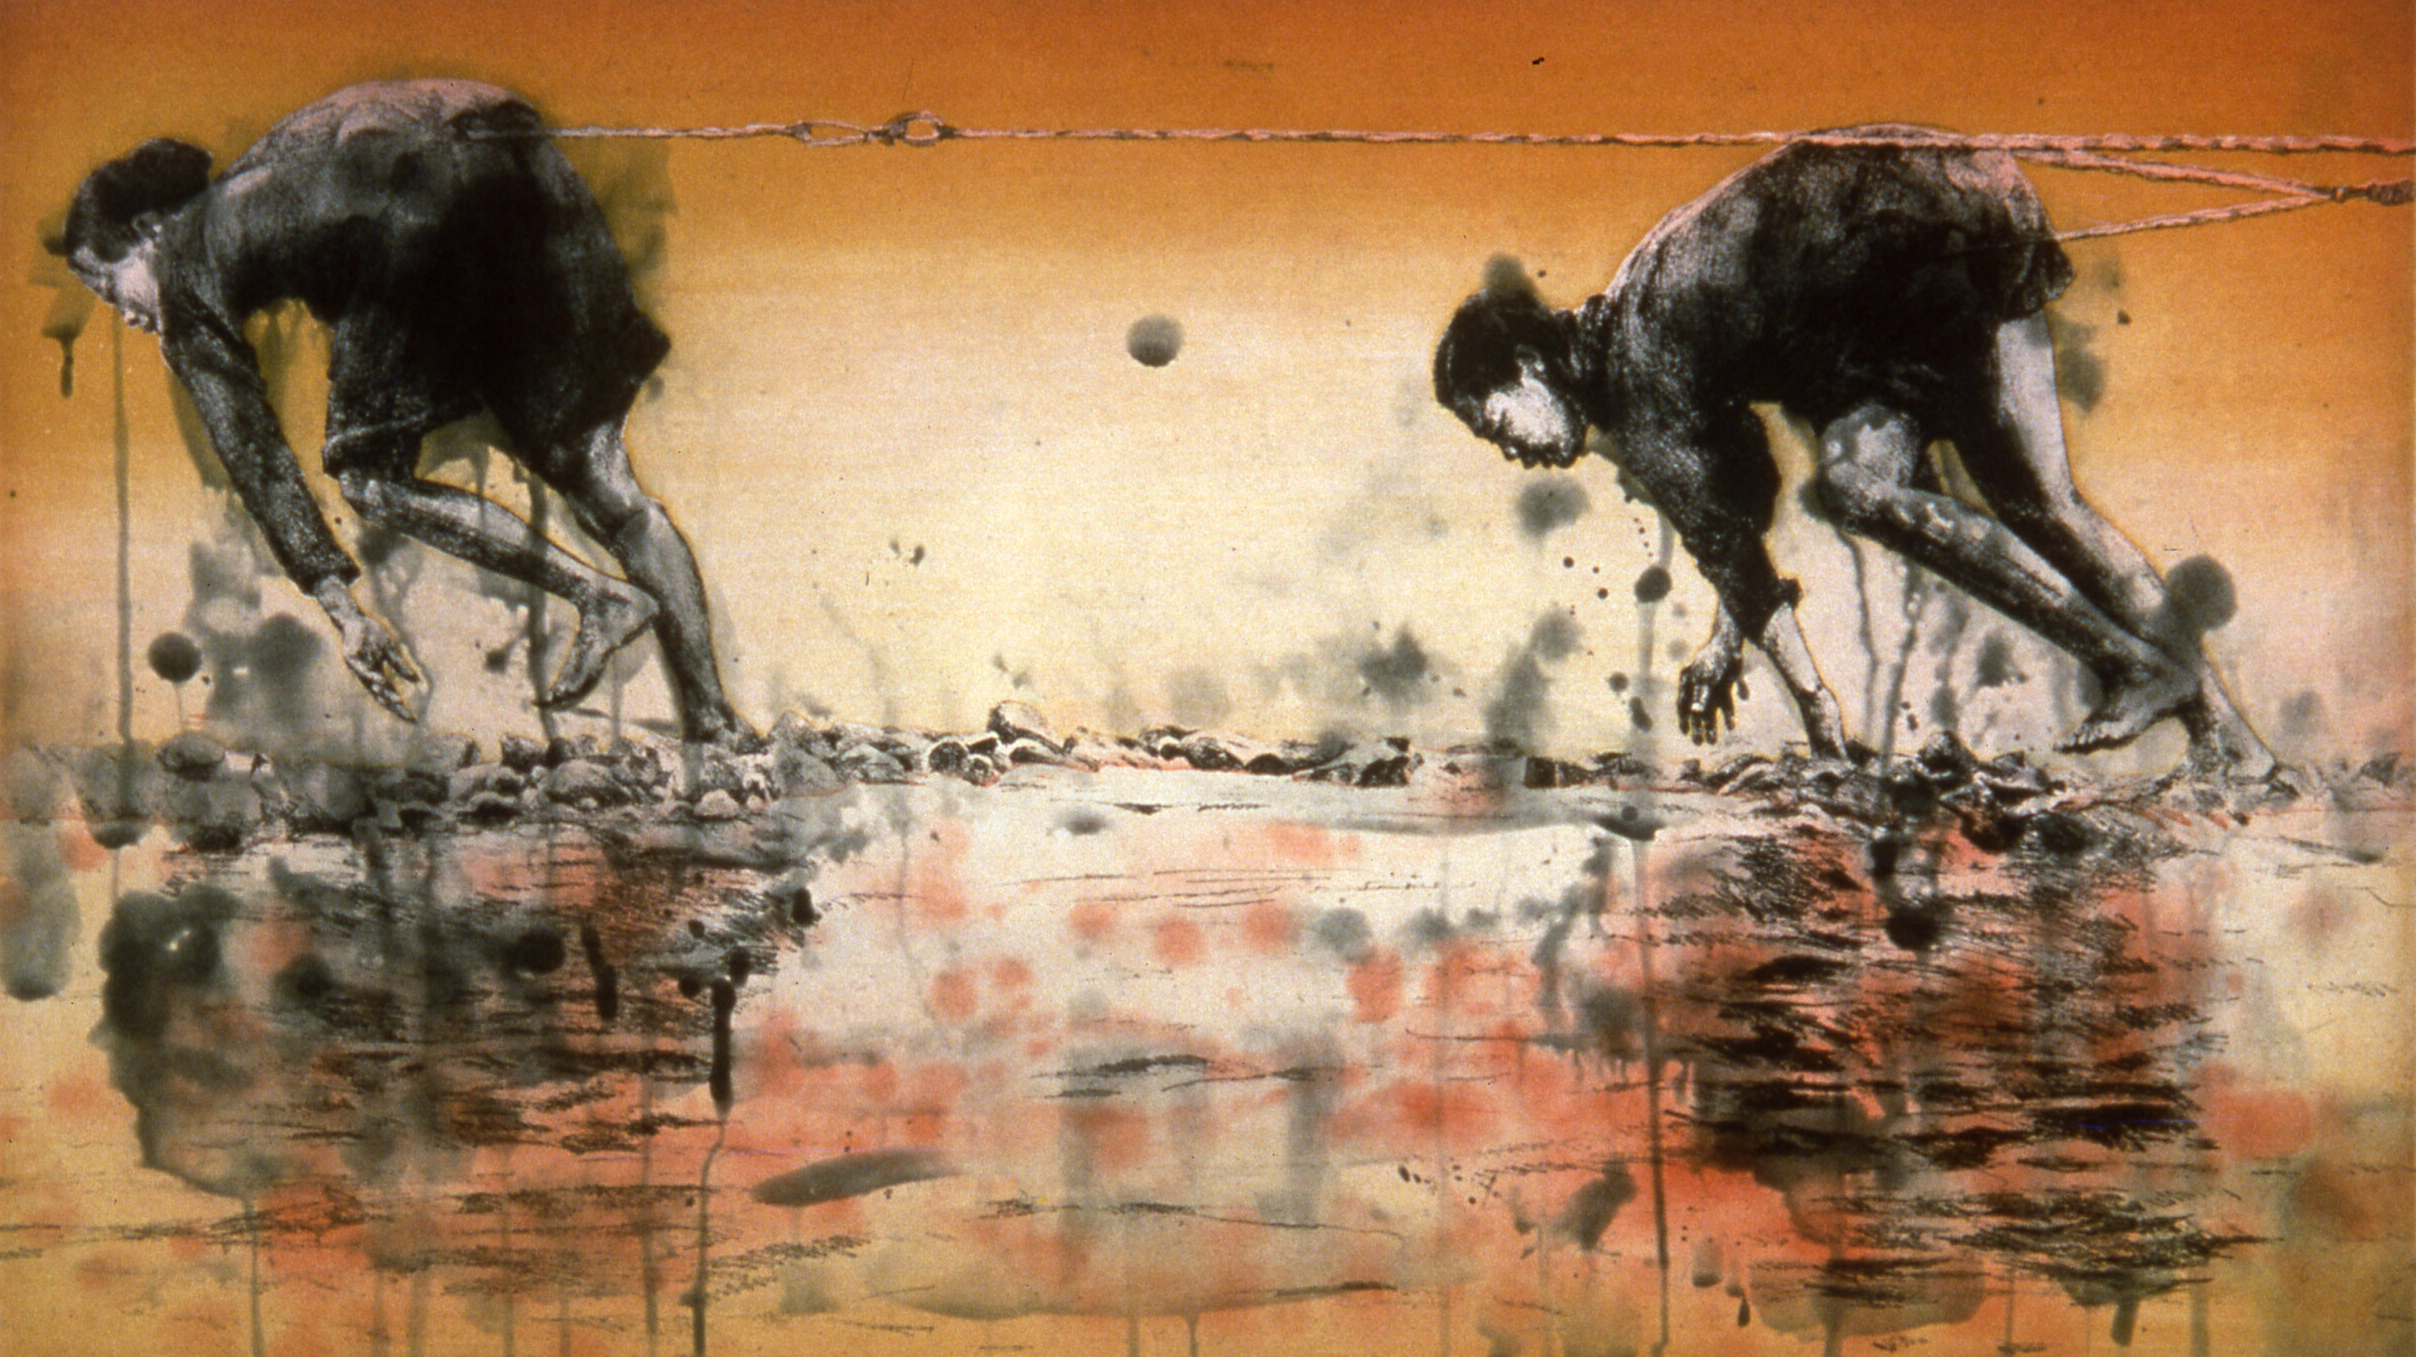 Two monochromatic women, both facing the left, are lined up and bending down as if scrambling through a rocky, shallow river. The background has tints of yellow and orange, and there are watery black ink marks splattering the surface.